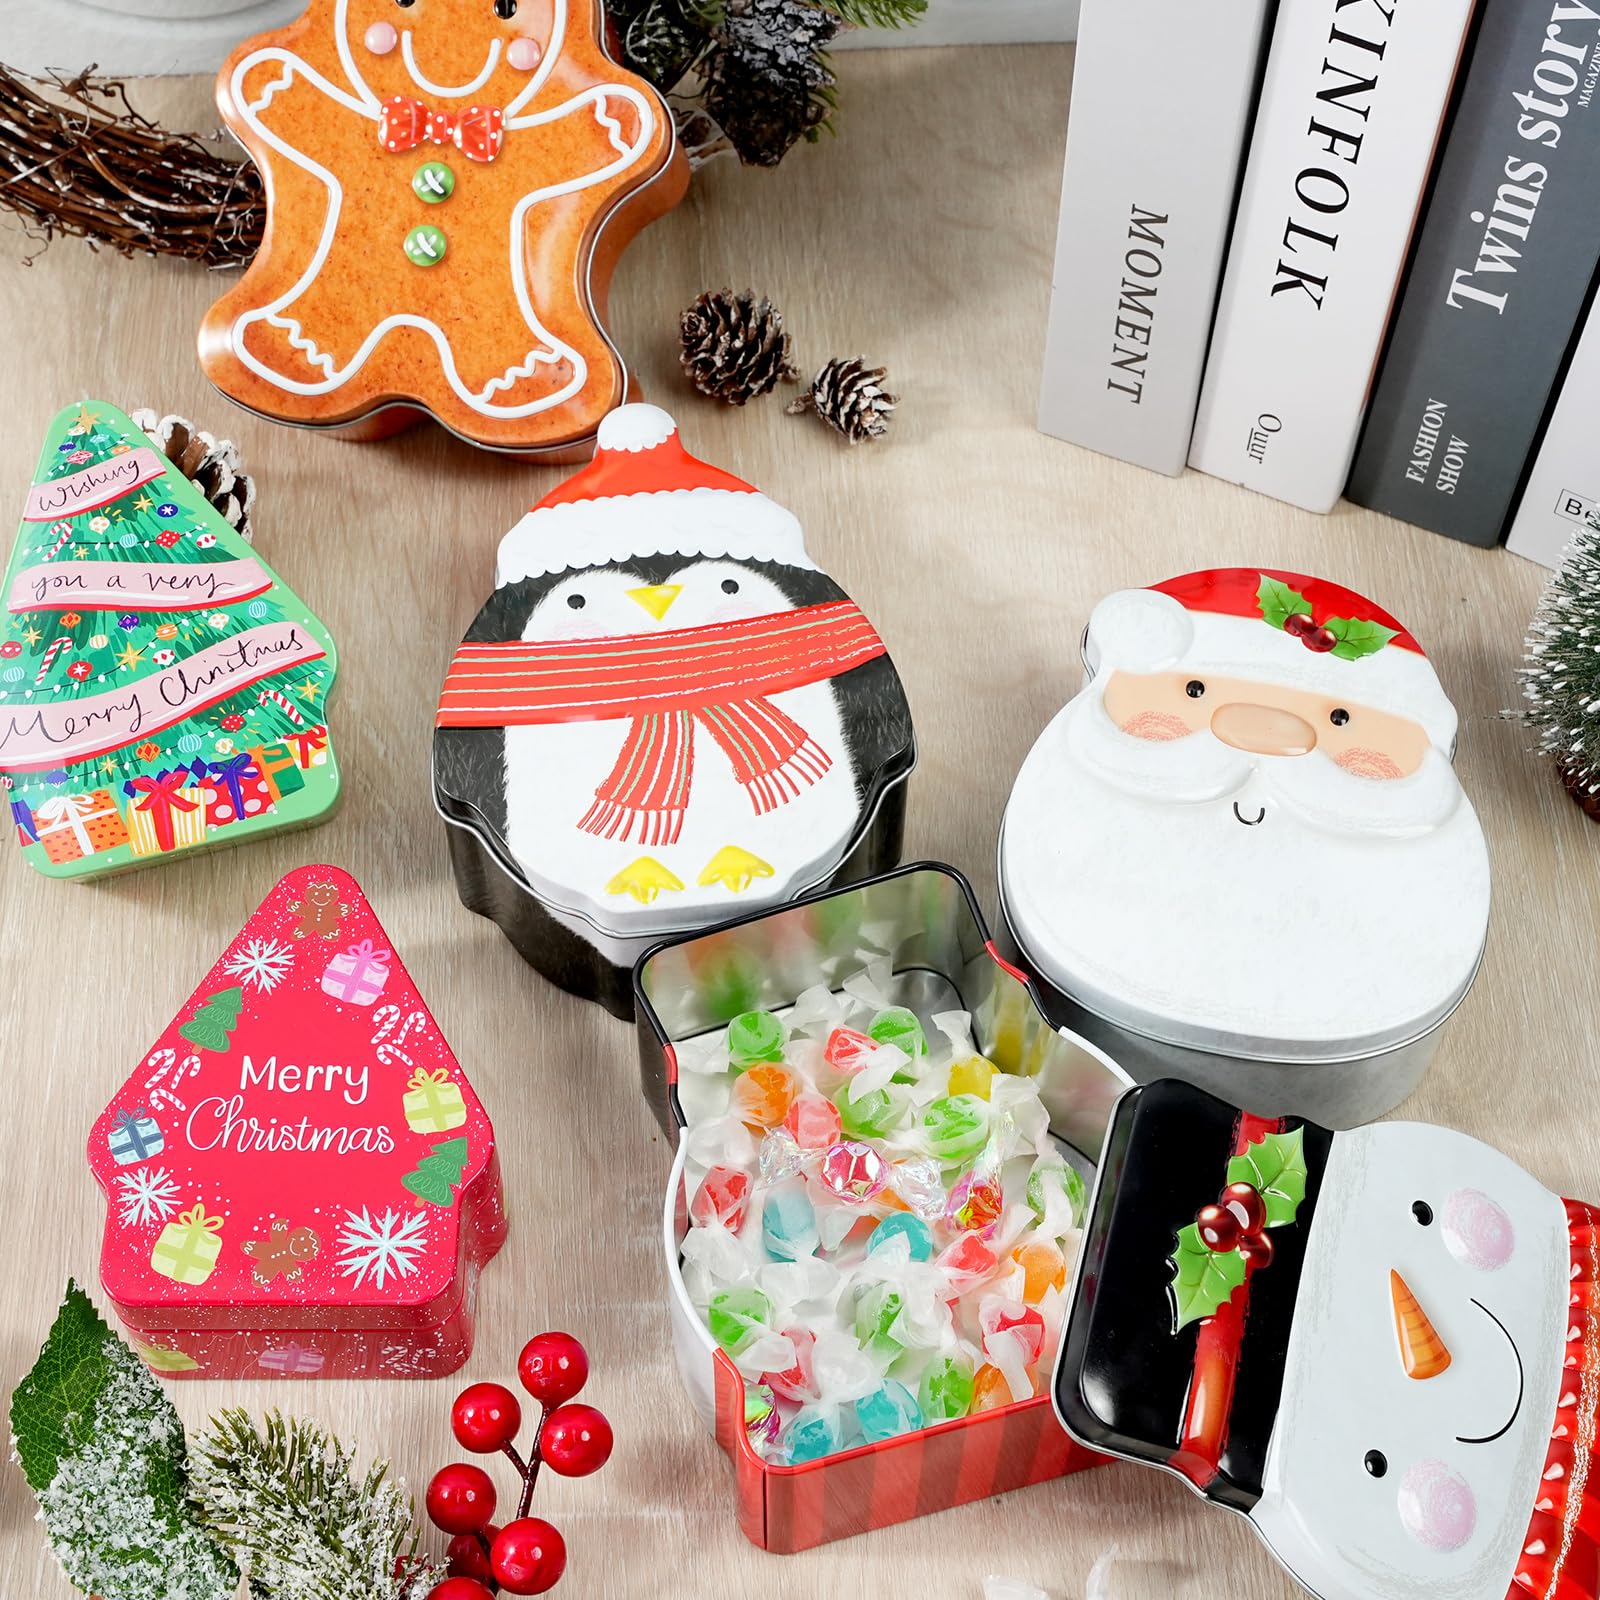 6 Pcs Christmas Cookie Tin Box Set Xmas Metal Candy Tins with Lids Food Storage Containers Cookie Jar Christmas Gift Packing Solution for Storing Candy Chocolate Biscuits Christmas Party Favor